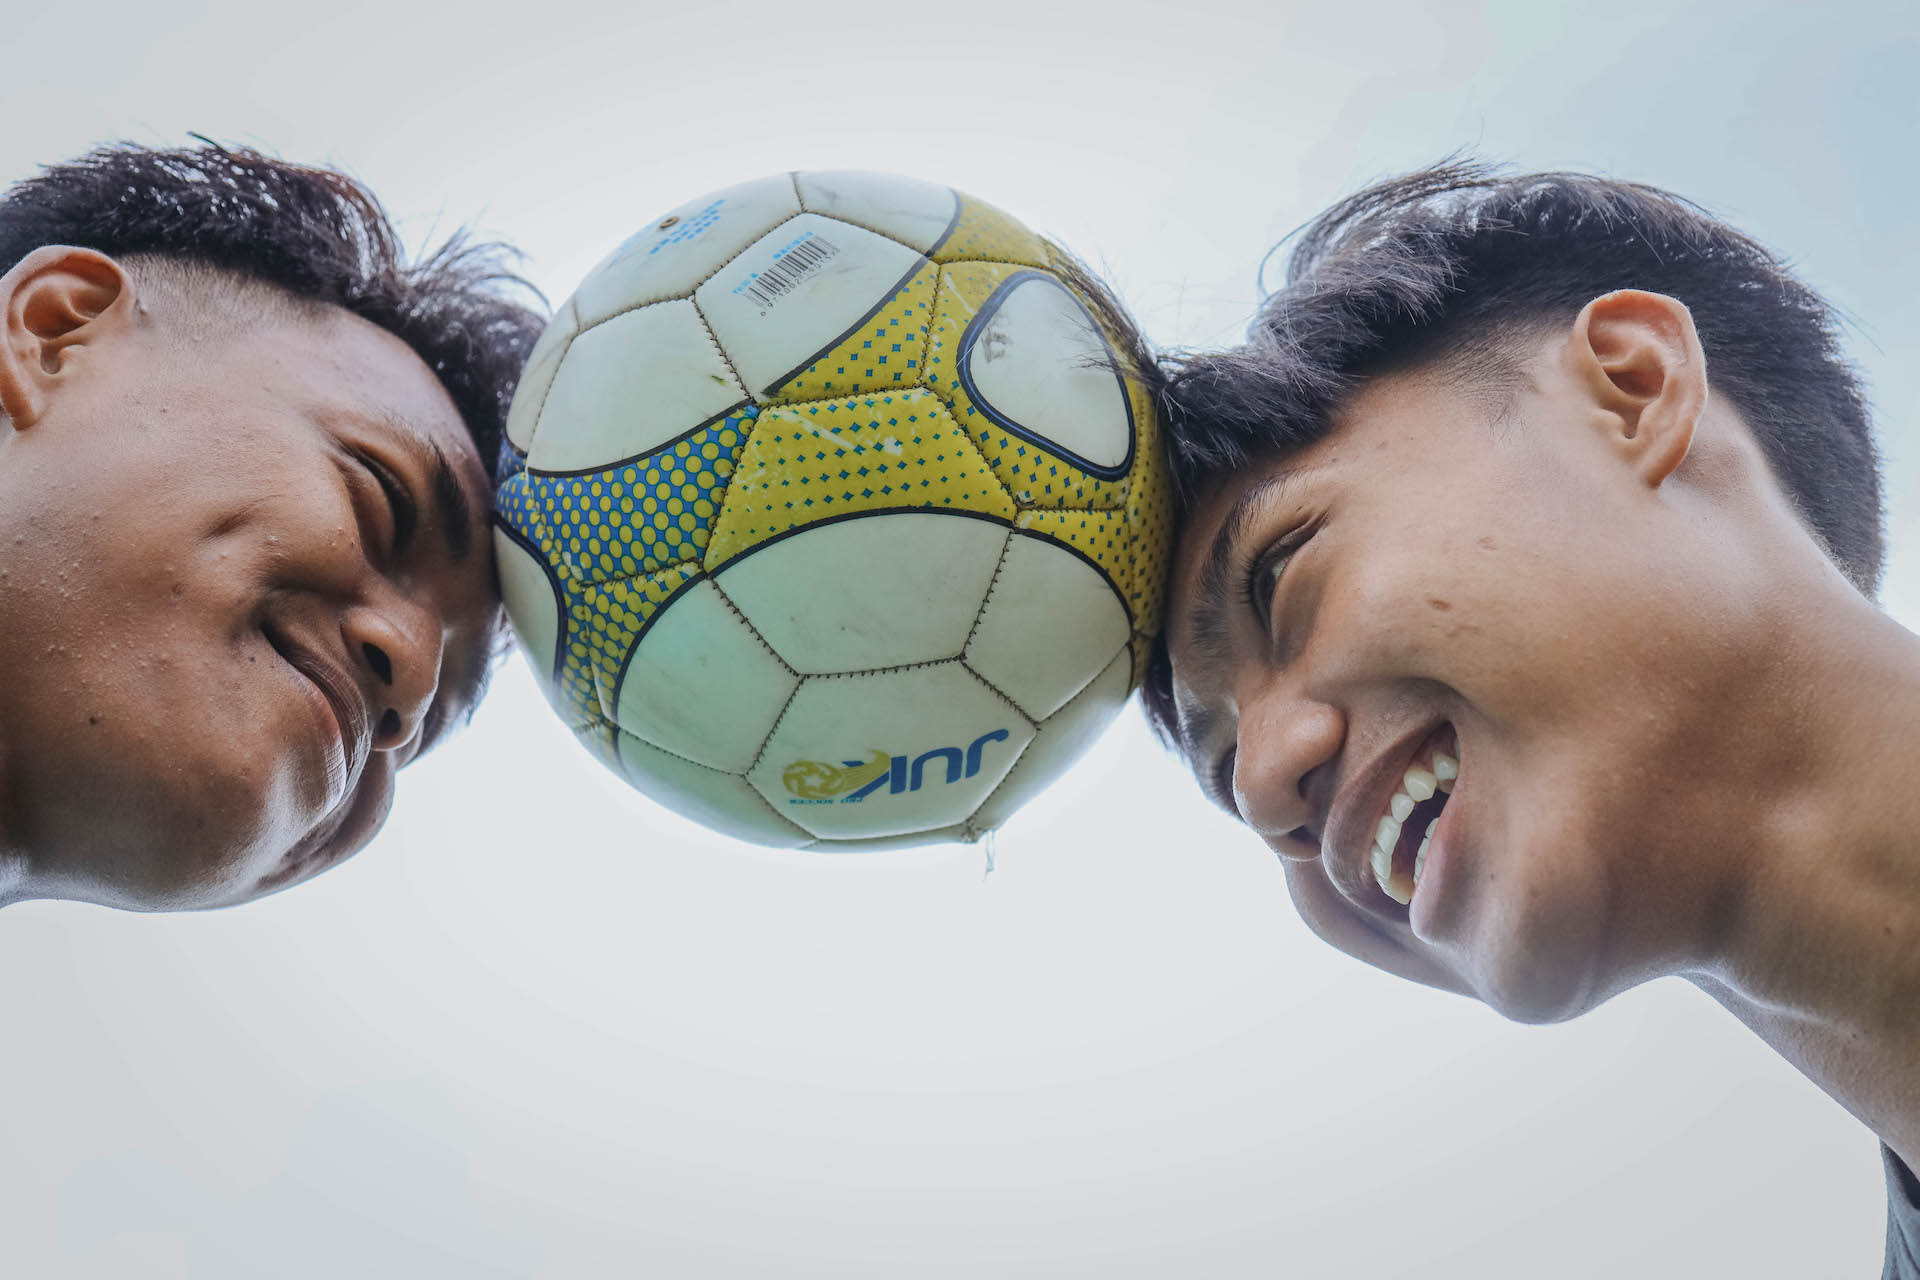 Two boys balance a soccer ball between their heads while smiling.